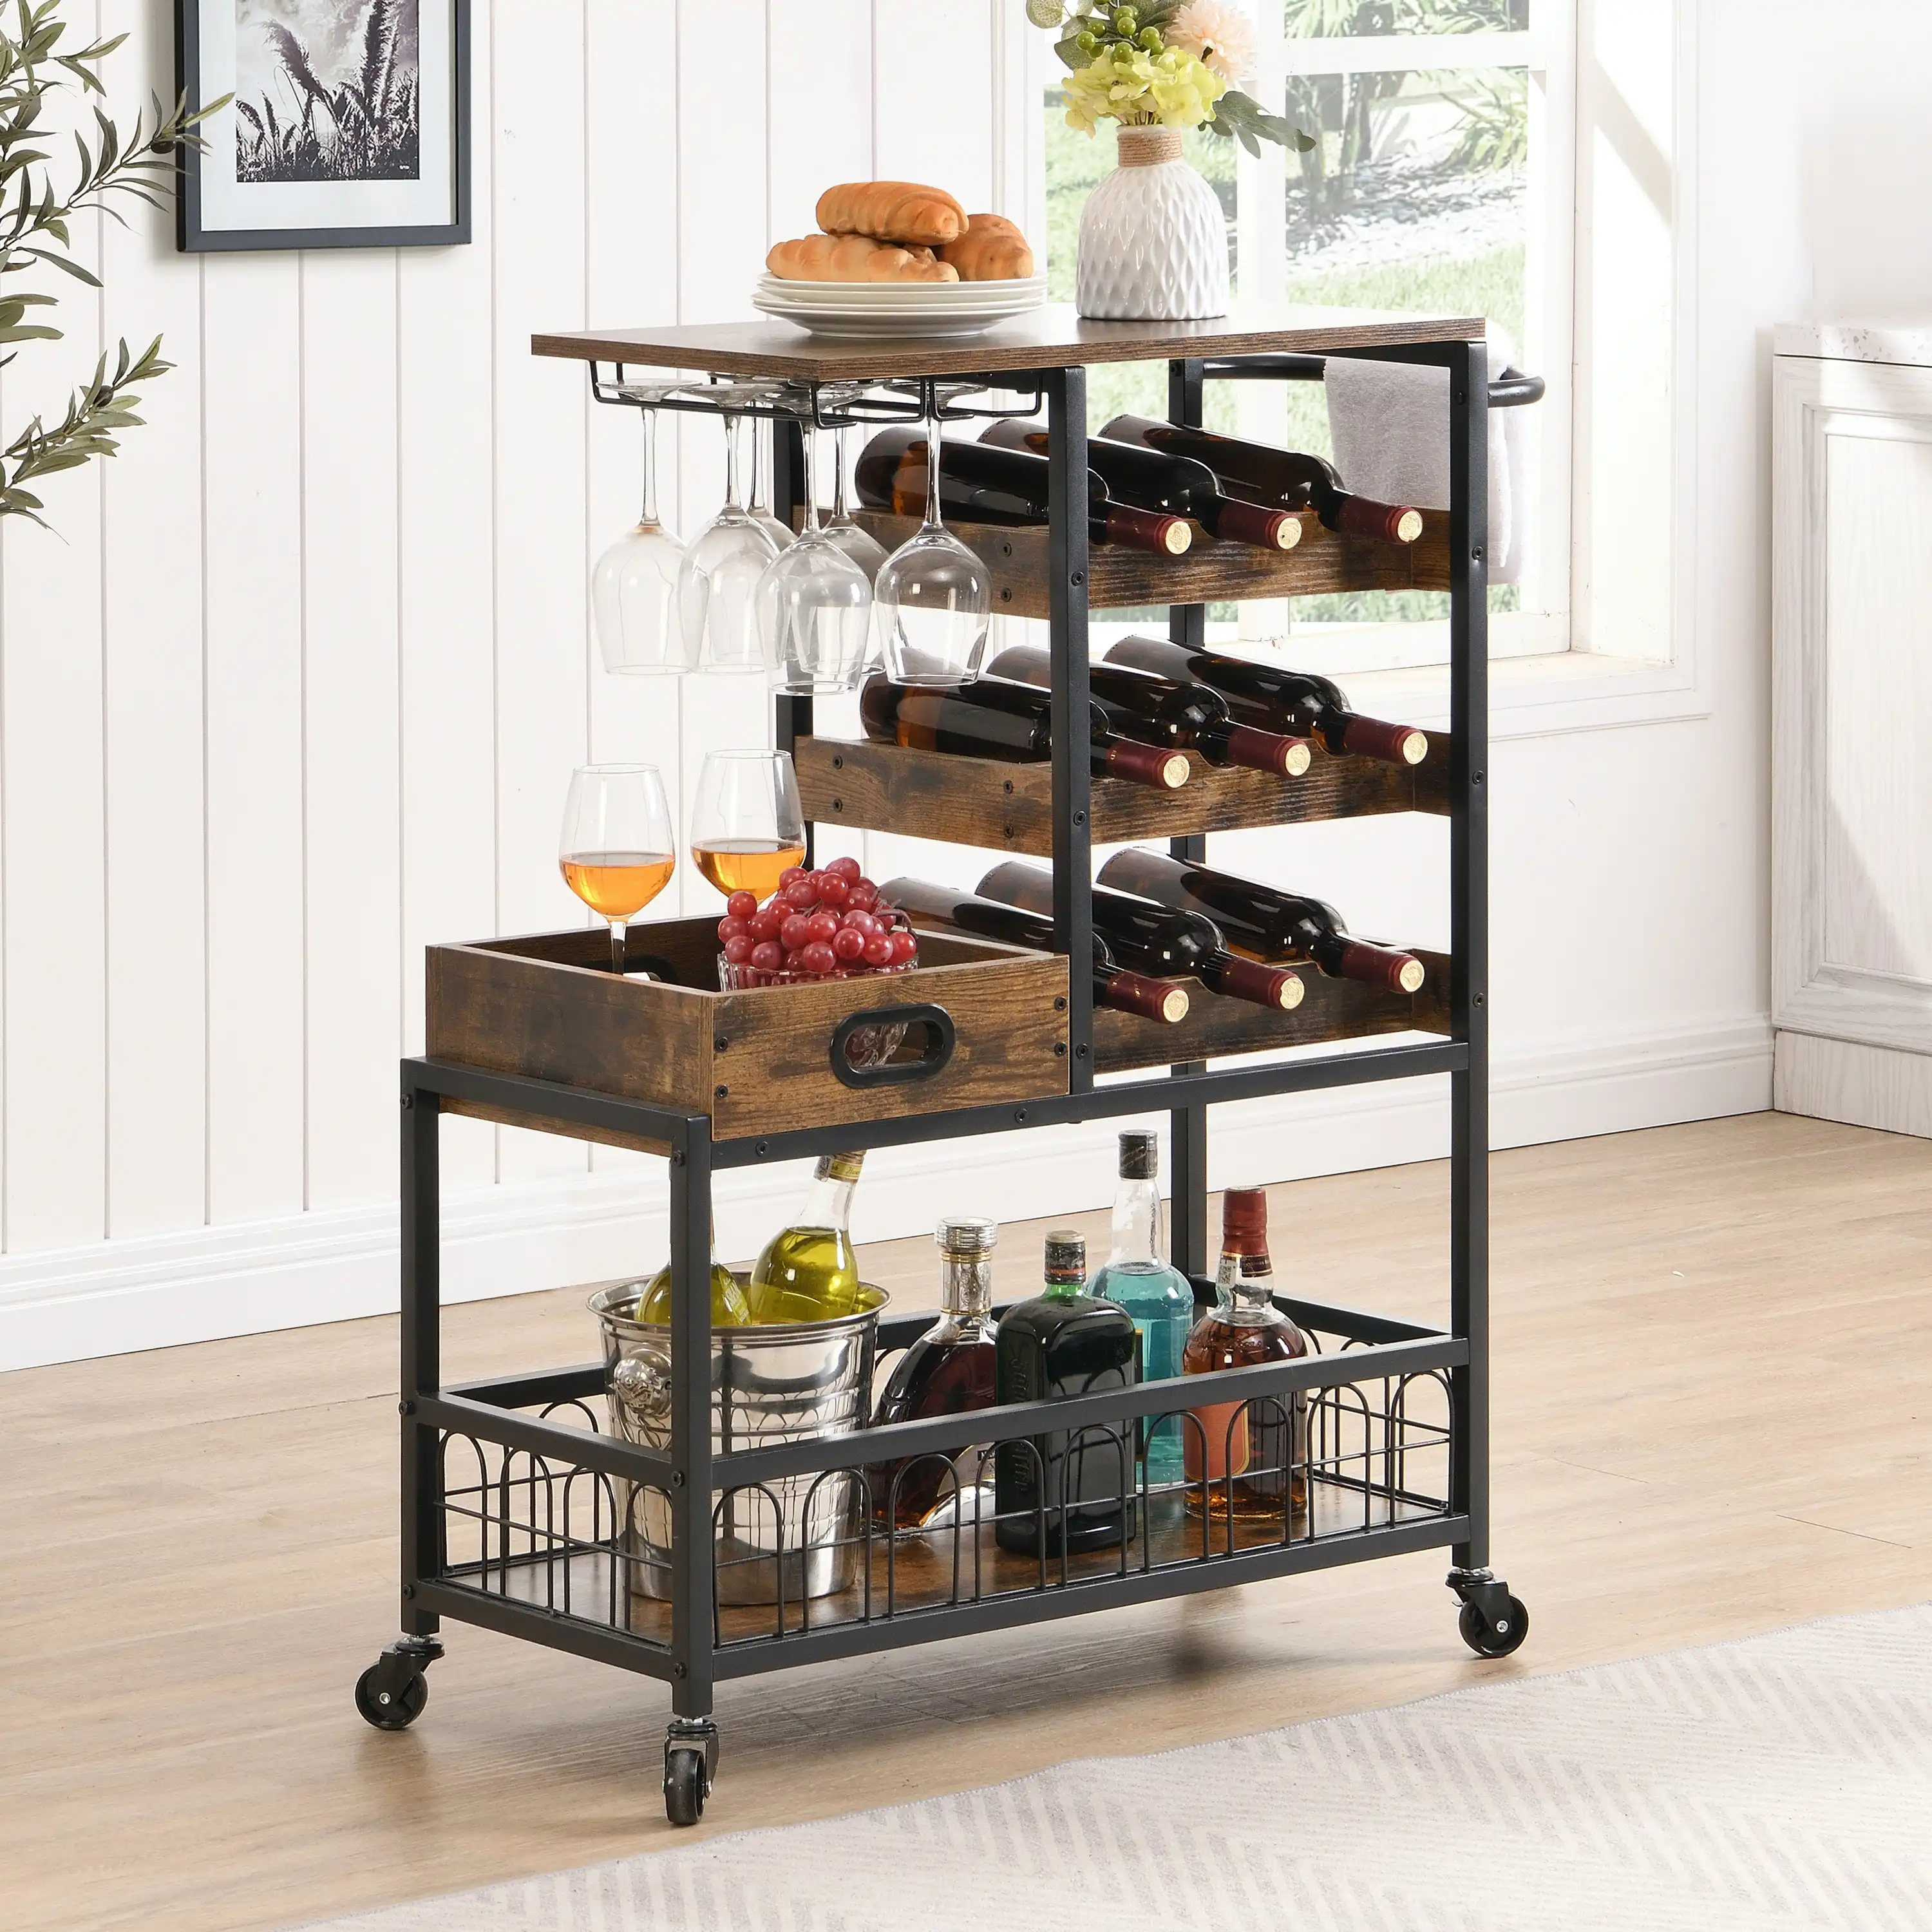 IHOMDEC Bar Cart on Wheels with Wine Rack and Glass Holder, Removable Wood Tray Rustic Brown